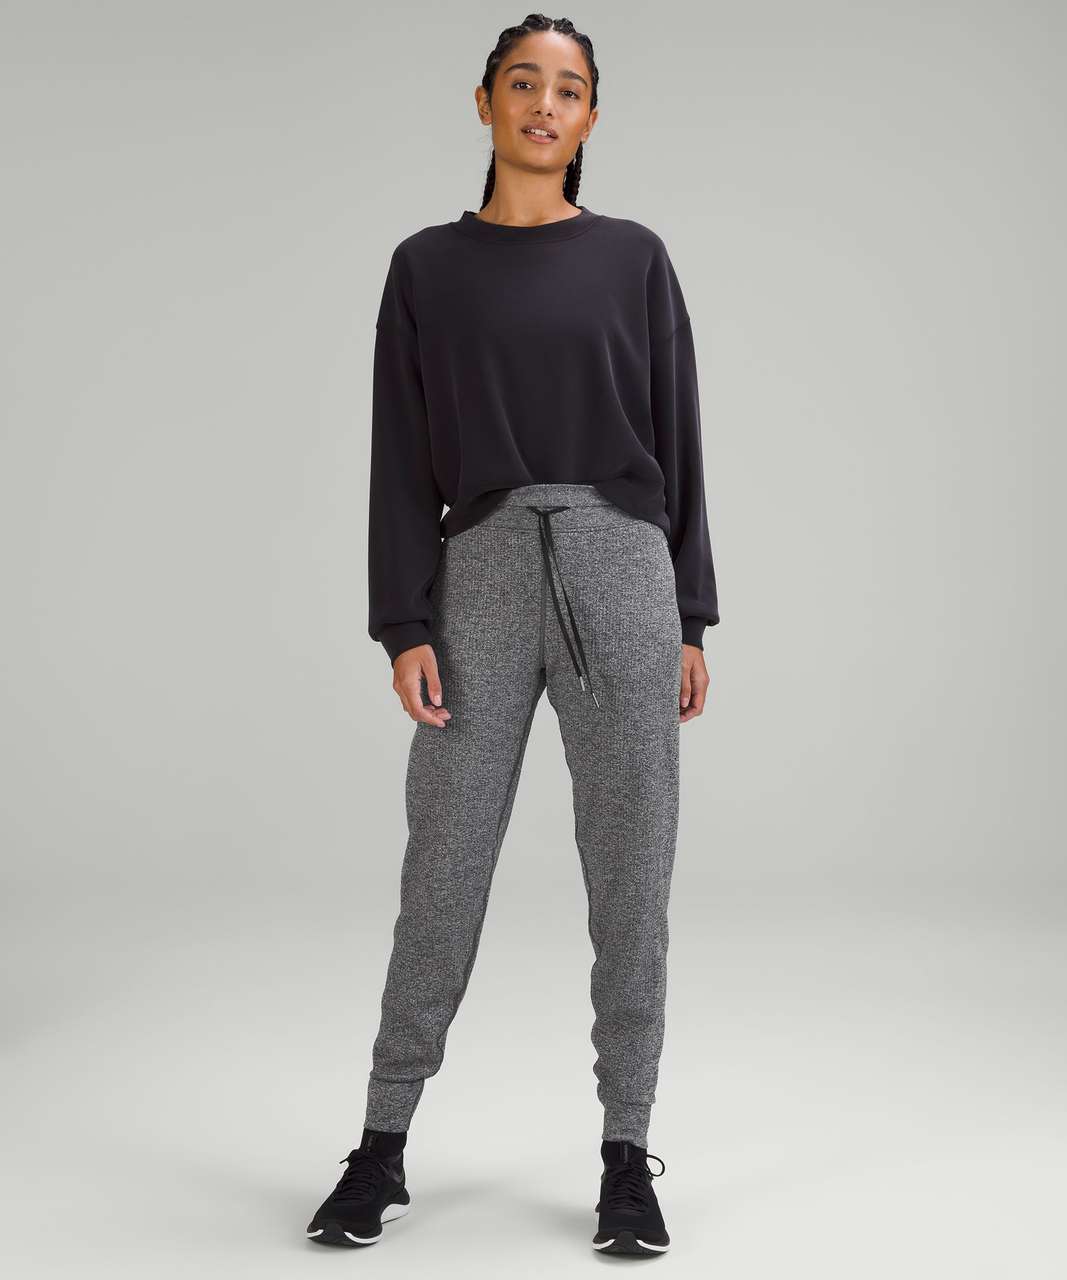 Lululemon Engineered Warmth Relaxed Fit Jogger - Black / White